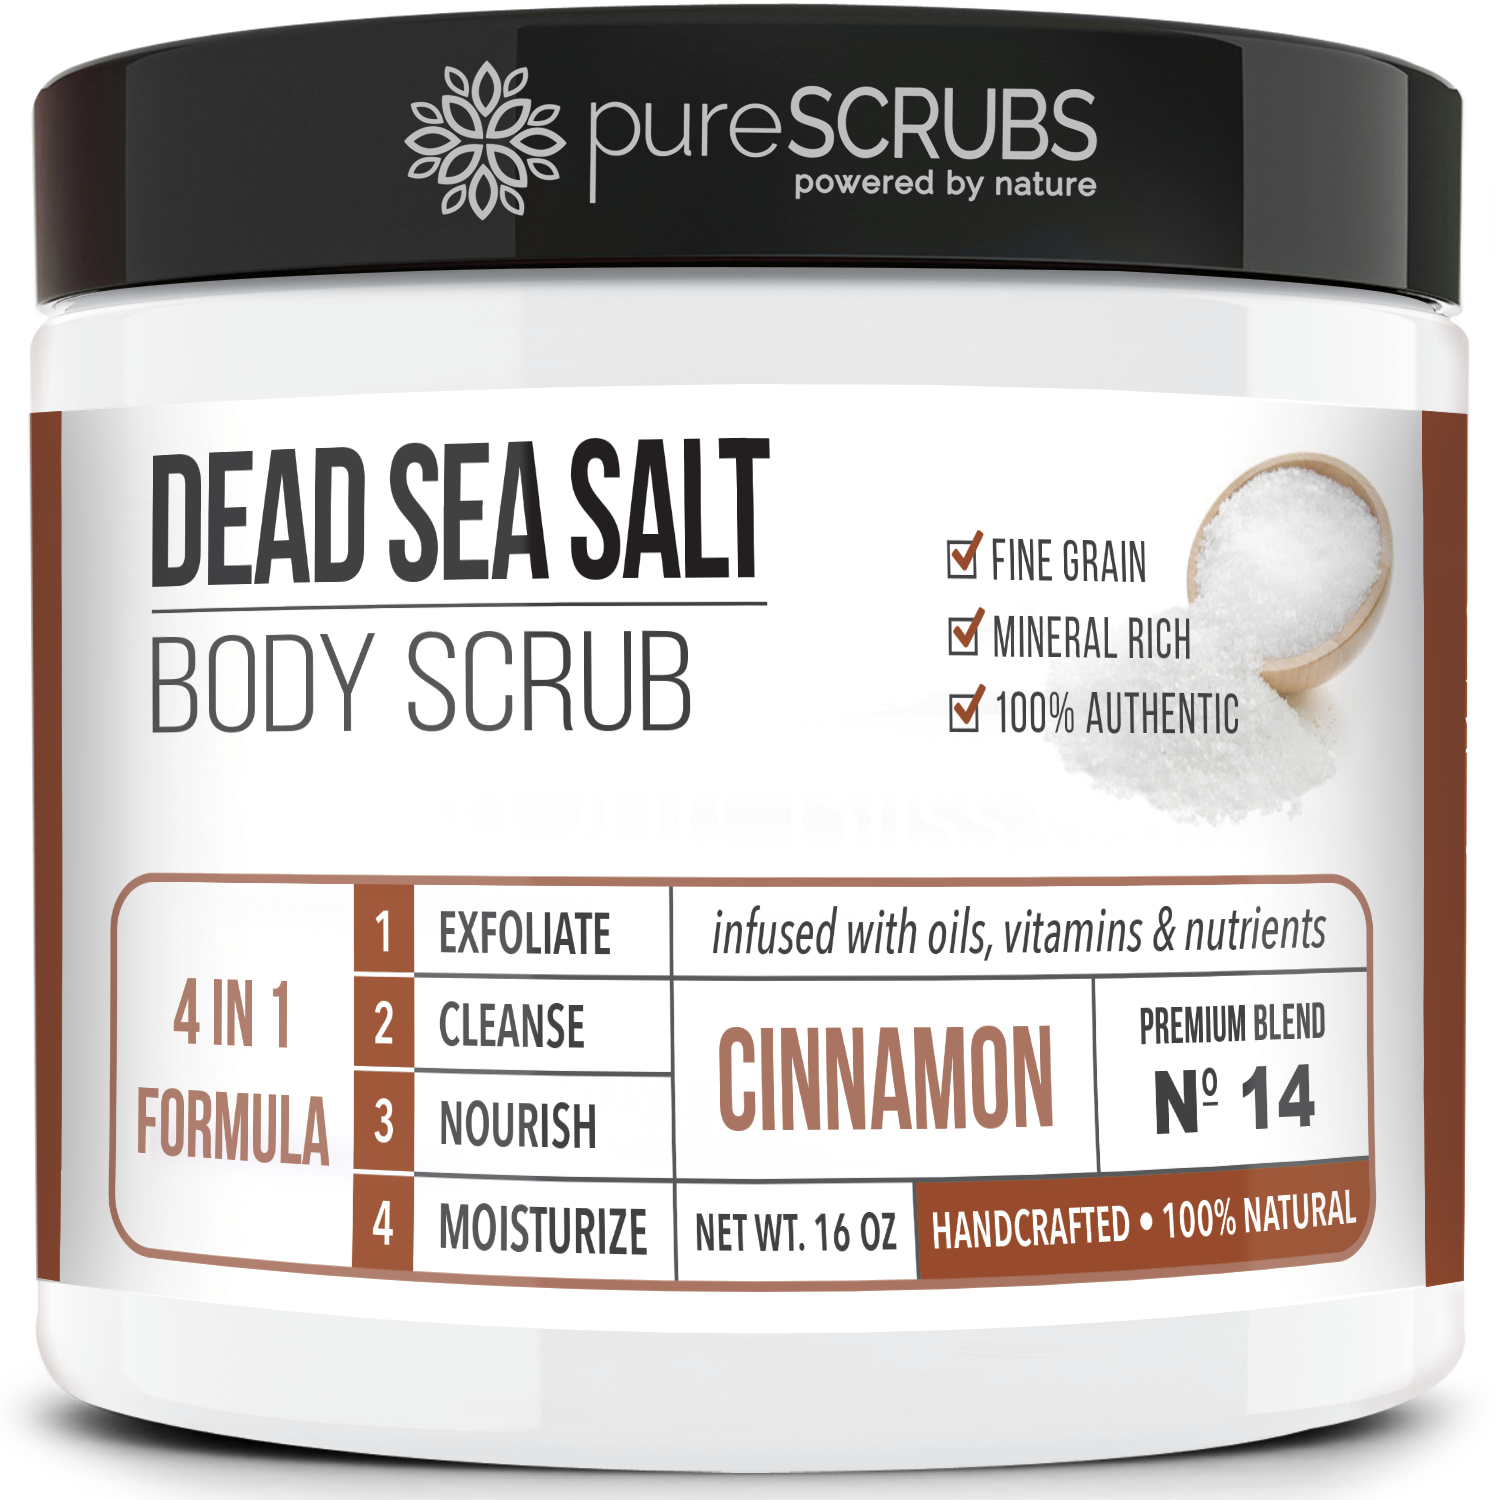 purescrubs Premium Blend #14 cinnamon dead sea salt body scrub to exfoliate your skin comes with free loofah pad free exfoliating organic oatmeal bar soap shea butter and honey and free eco-friendly bamboo spoon to stir and scoop out the scrub 